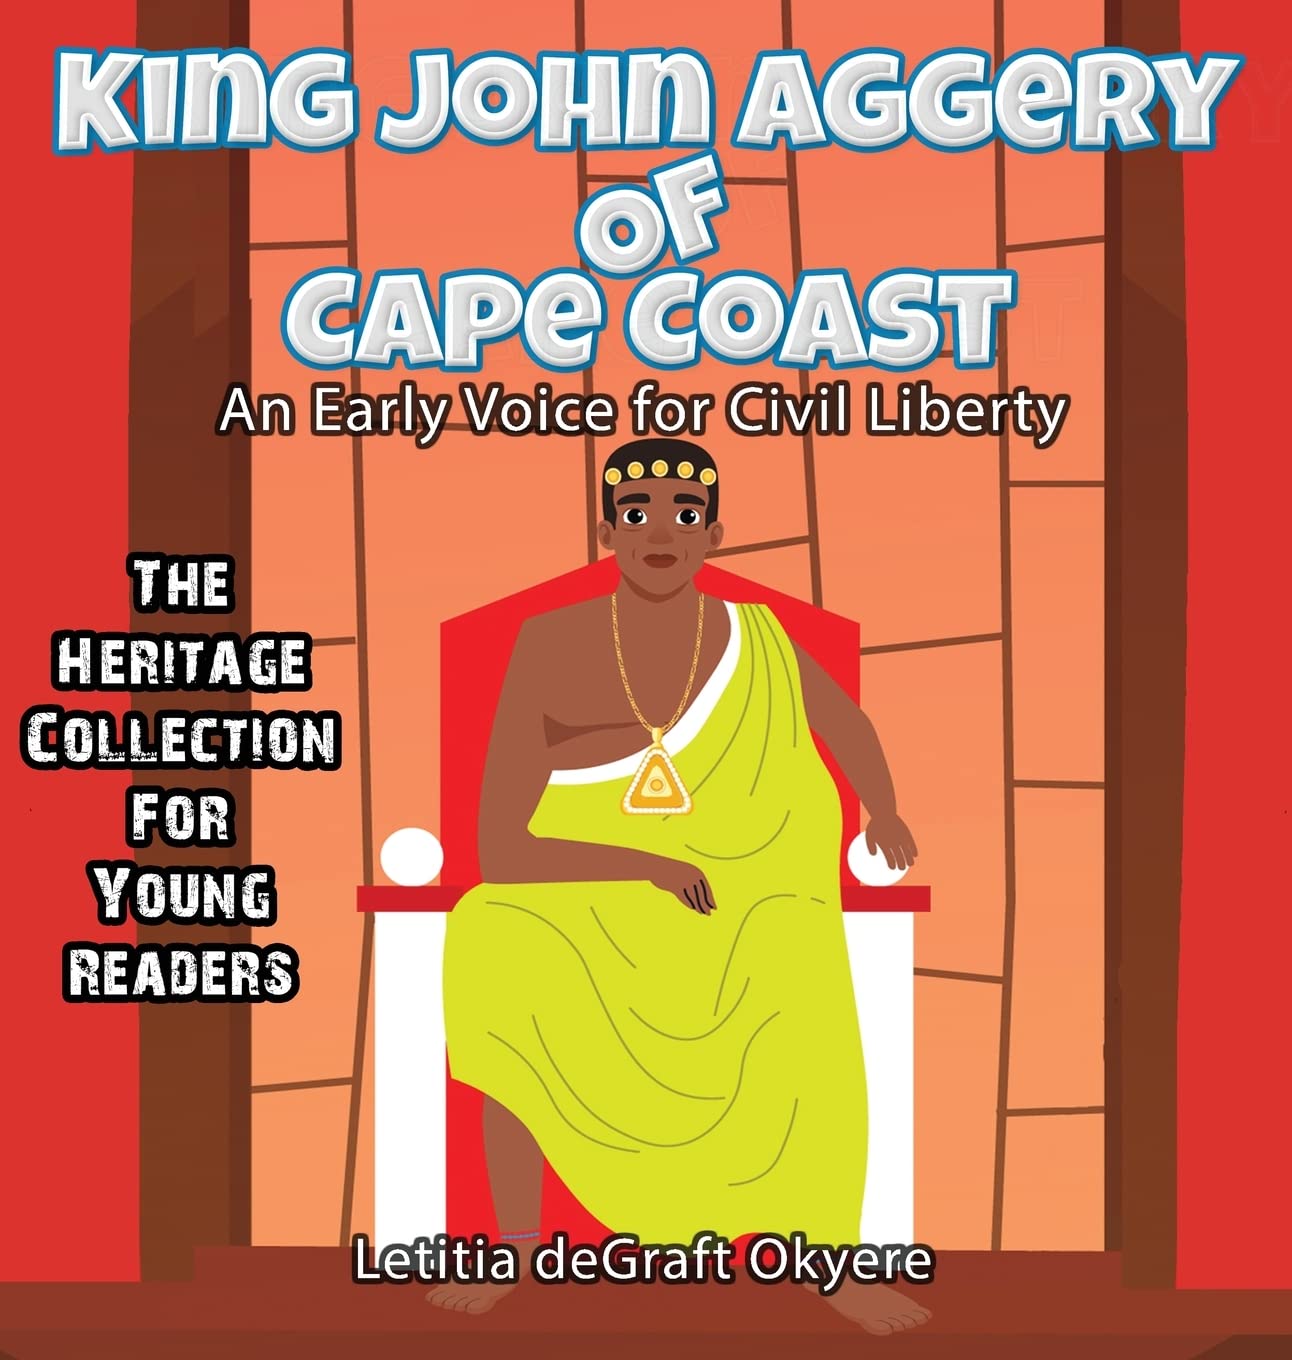 King John Aggery of Cape Coast: An Early Voice for Civil Liberty